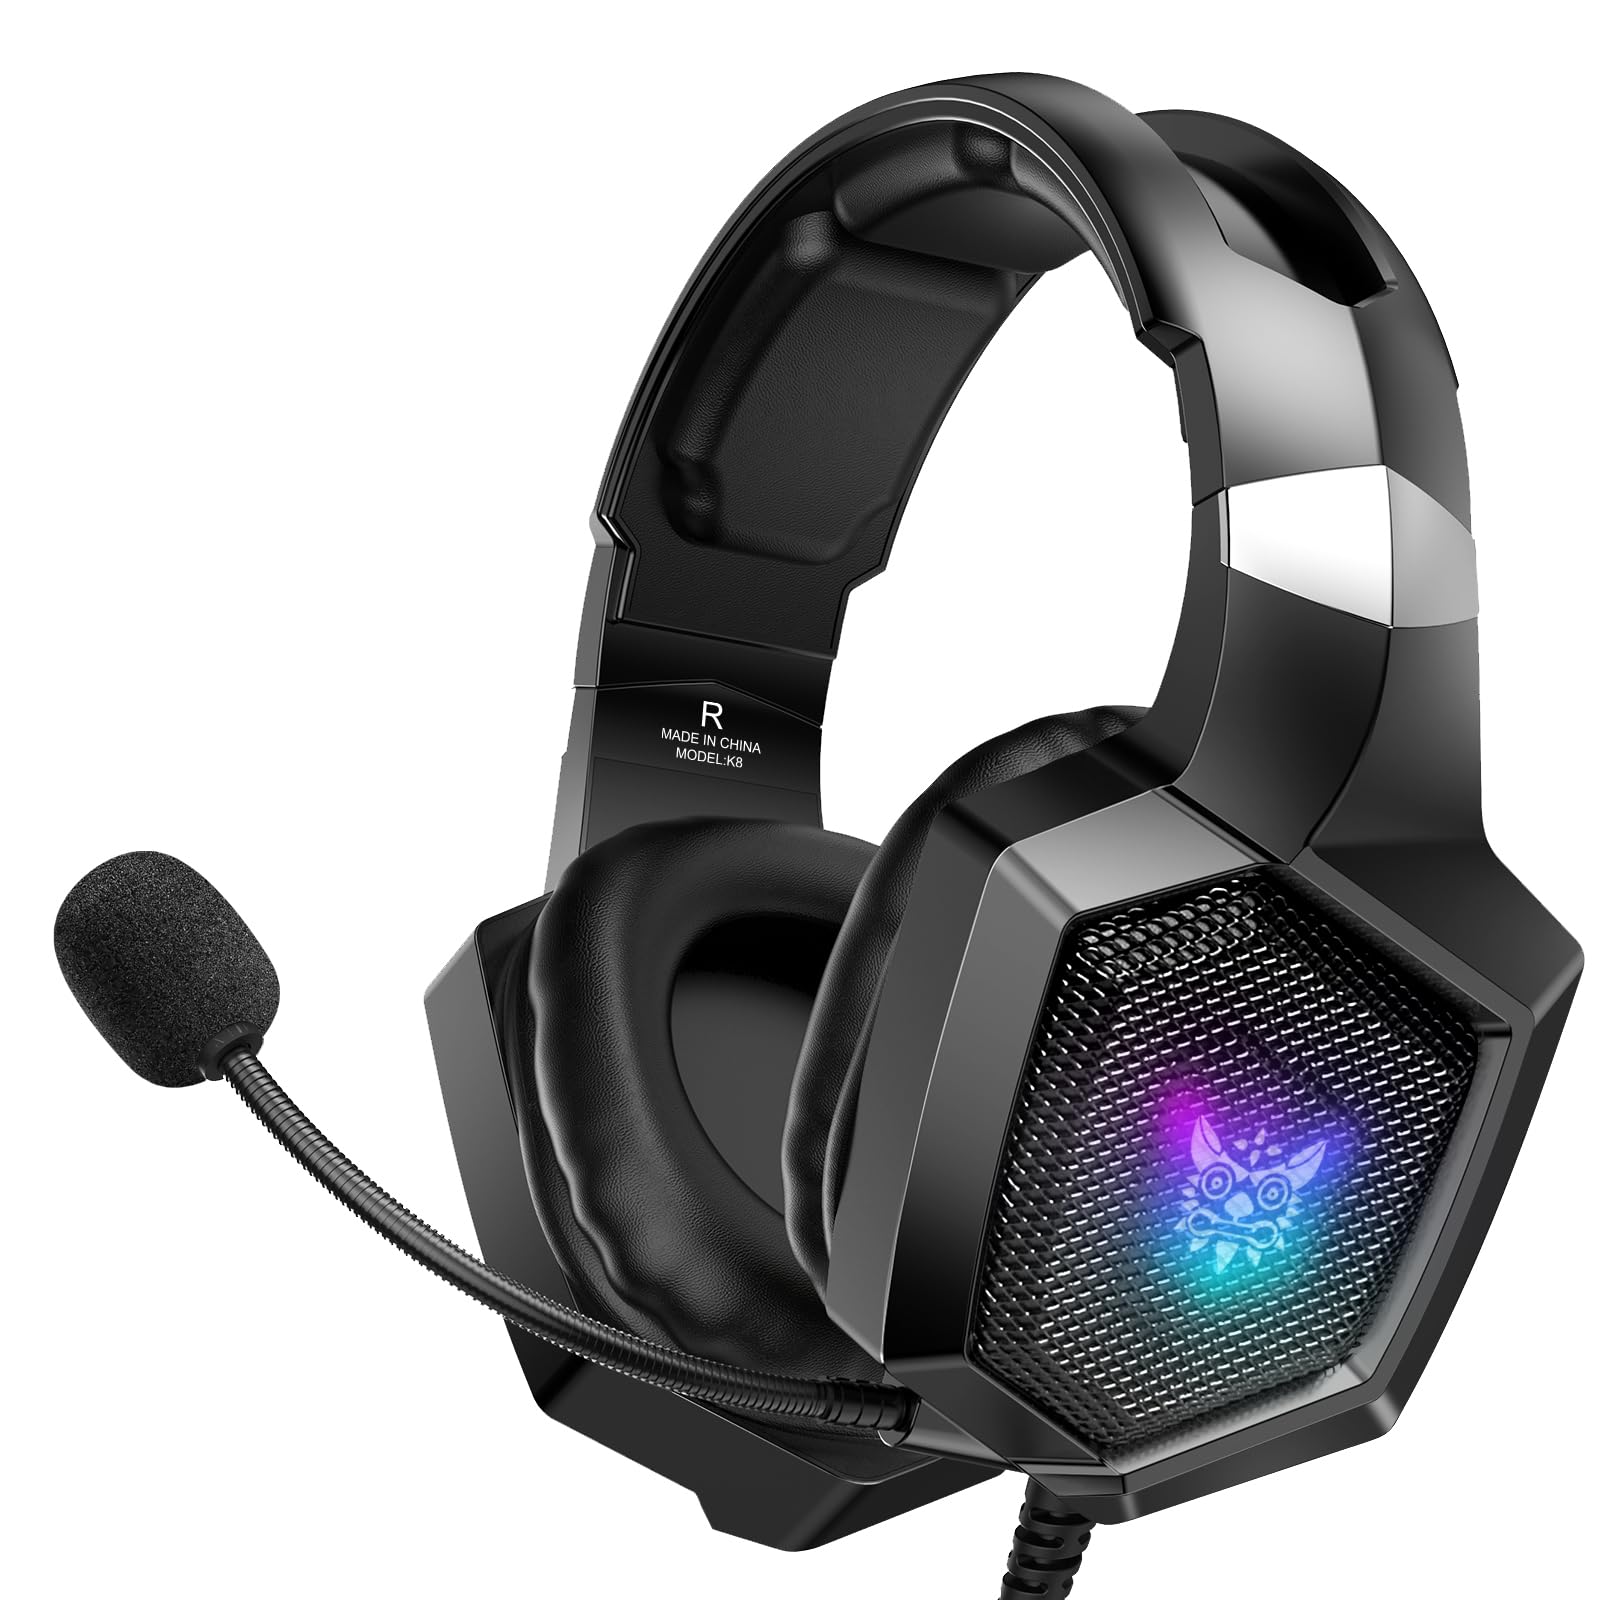 PS4 Mic Headset on sale